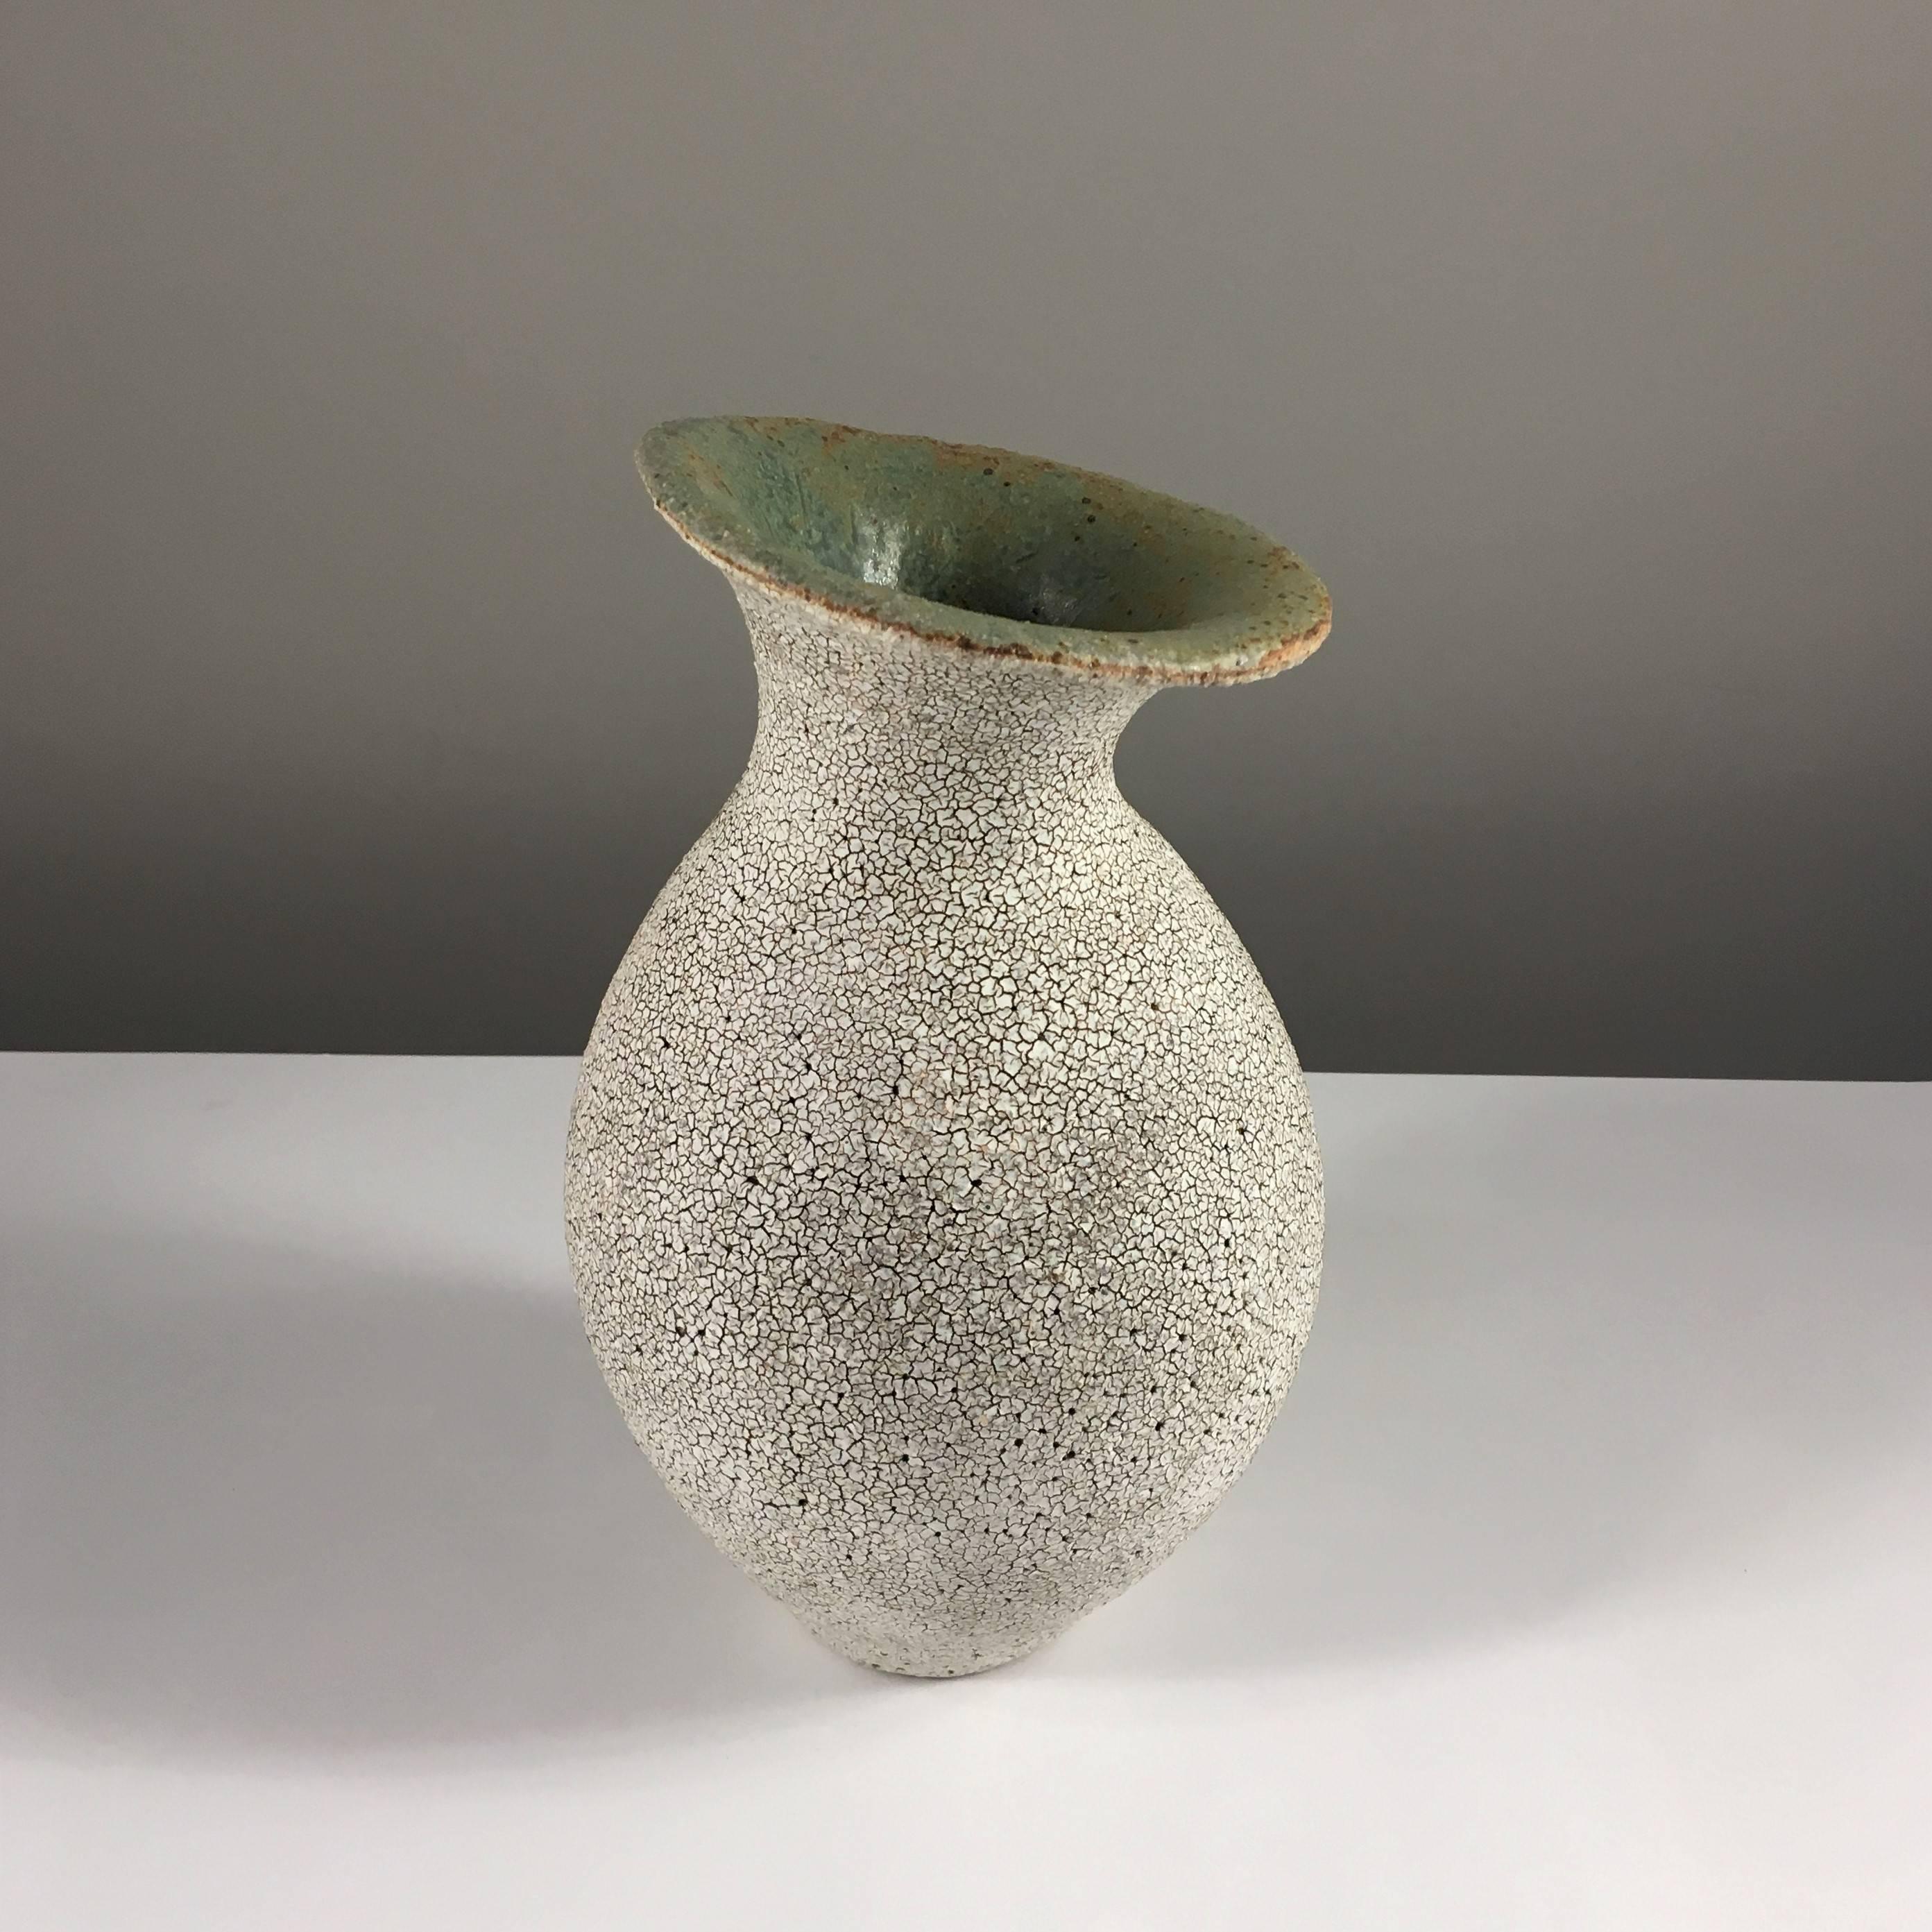 Contemporary ceramic artist Yumiko Kuga's glazed stoneware curved neck vase no. 161 is part of her Crackle series. All of the pieces in this series are hand-built and 100% handmade so they are one-of-a-kind and thus vary slightly from one another.